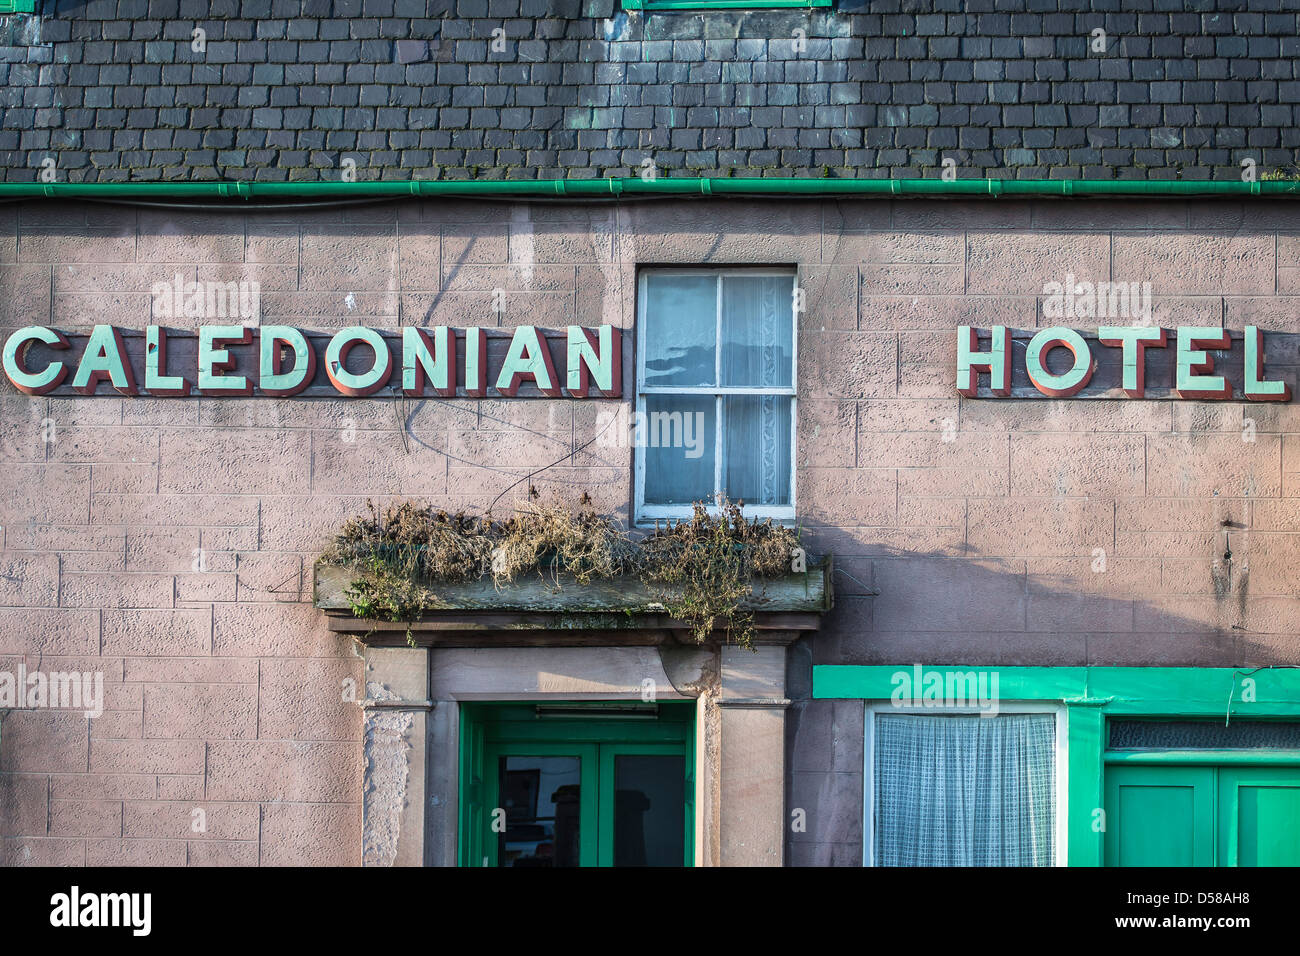 Caledonian Hotel am Beauly in Inverness-Shire, Schottland. Stockfoto